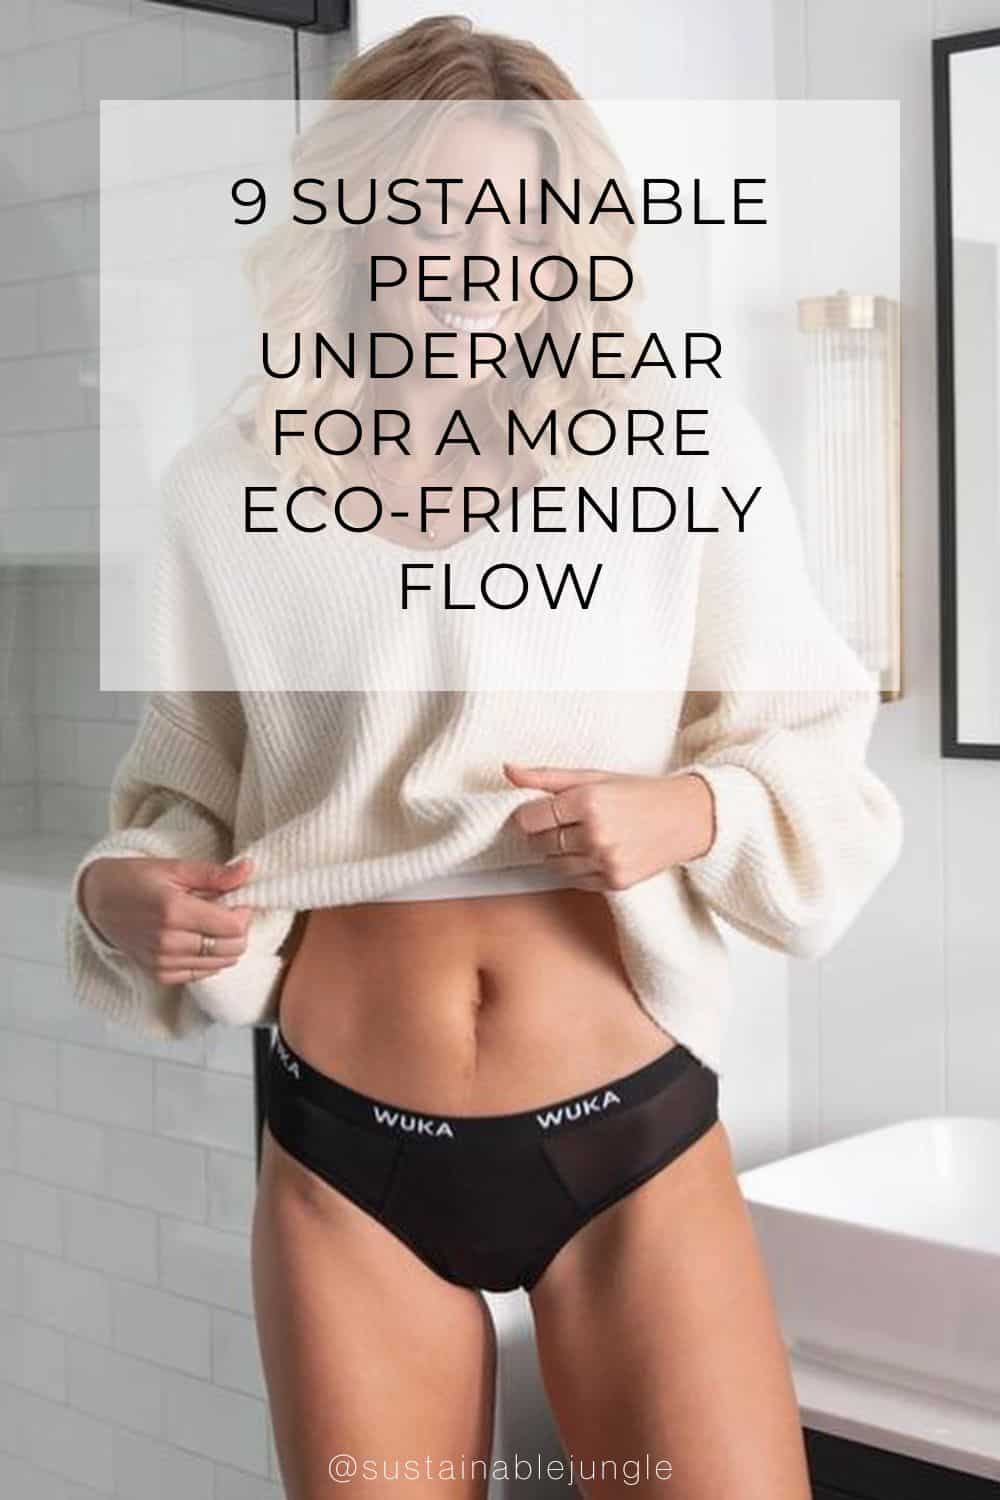 9 Sustainable Period Underwear For A More Eco-Friendly Flow Image by WUKA #sustainableperiodunderwear #ecofriendlypreiodunderwear #sustianablereusableperiodunderwear #areperiodunderwearsustainable #bestecofriendlyperiodunderwear #sustainablepfasfreeperiodunderwear #sustainablejungle